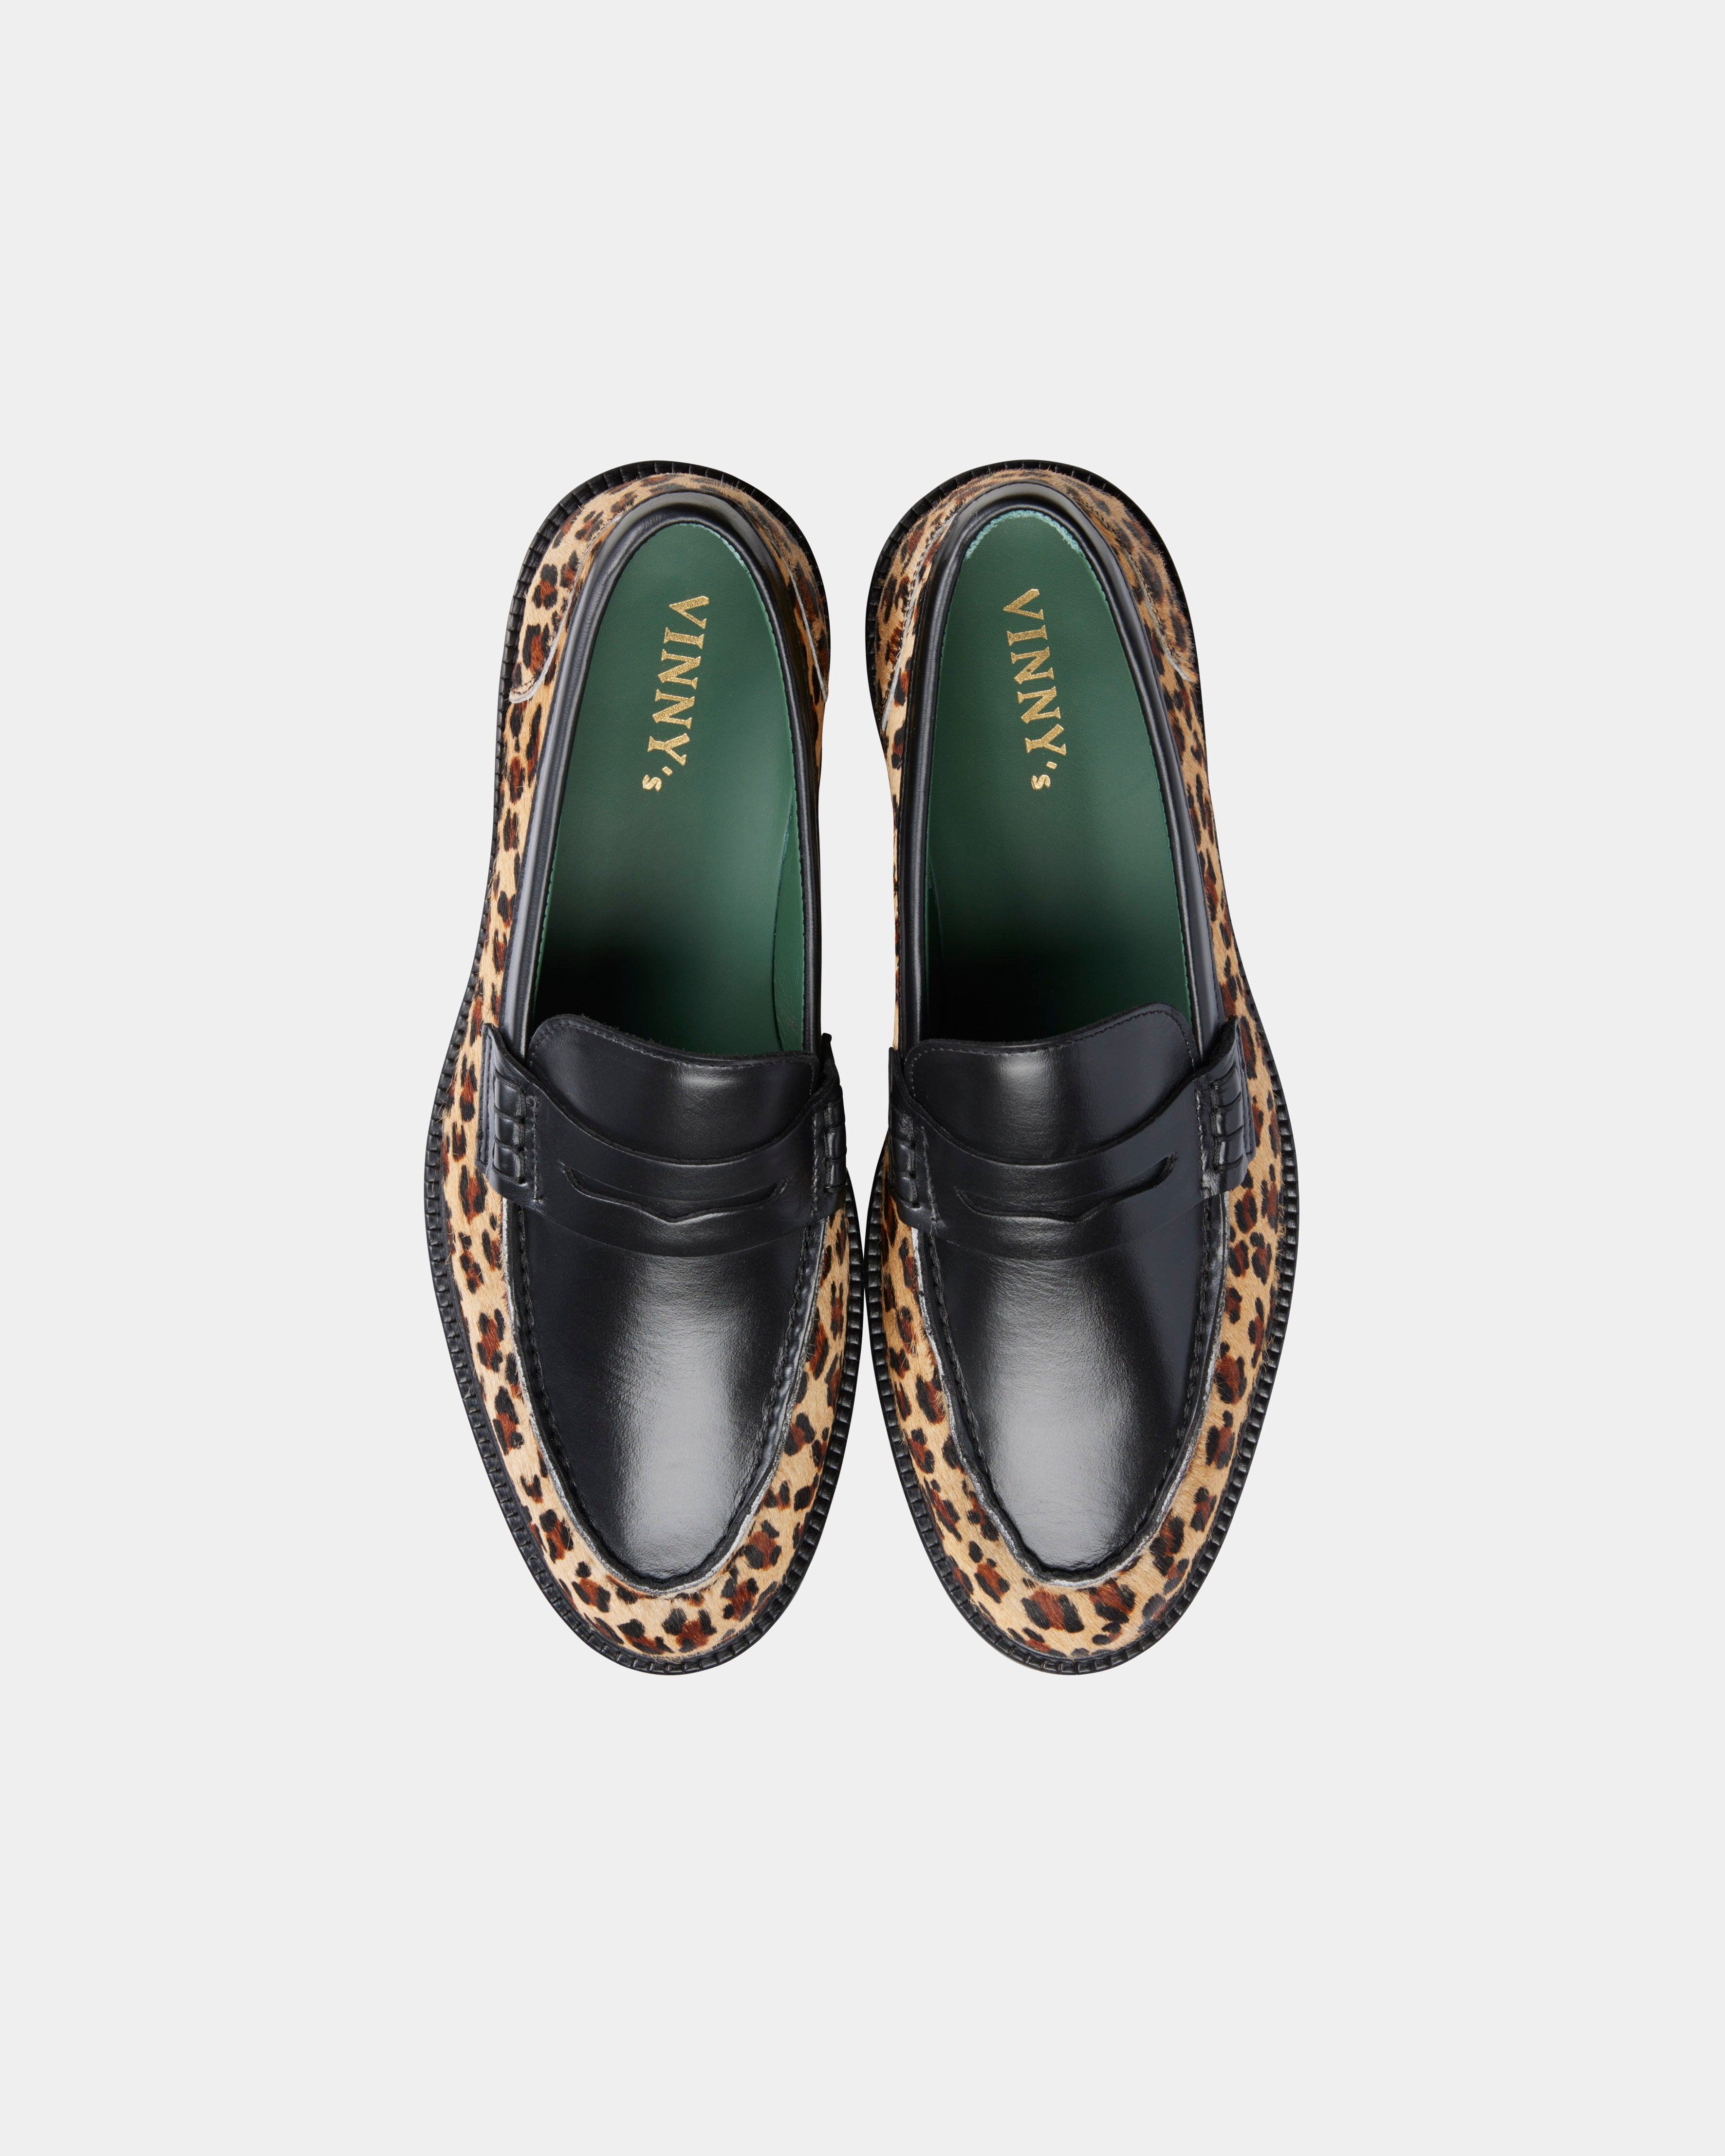 https://vinnysthevibe.com/products/townee-penny-loafer-44